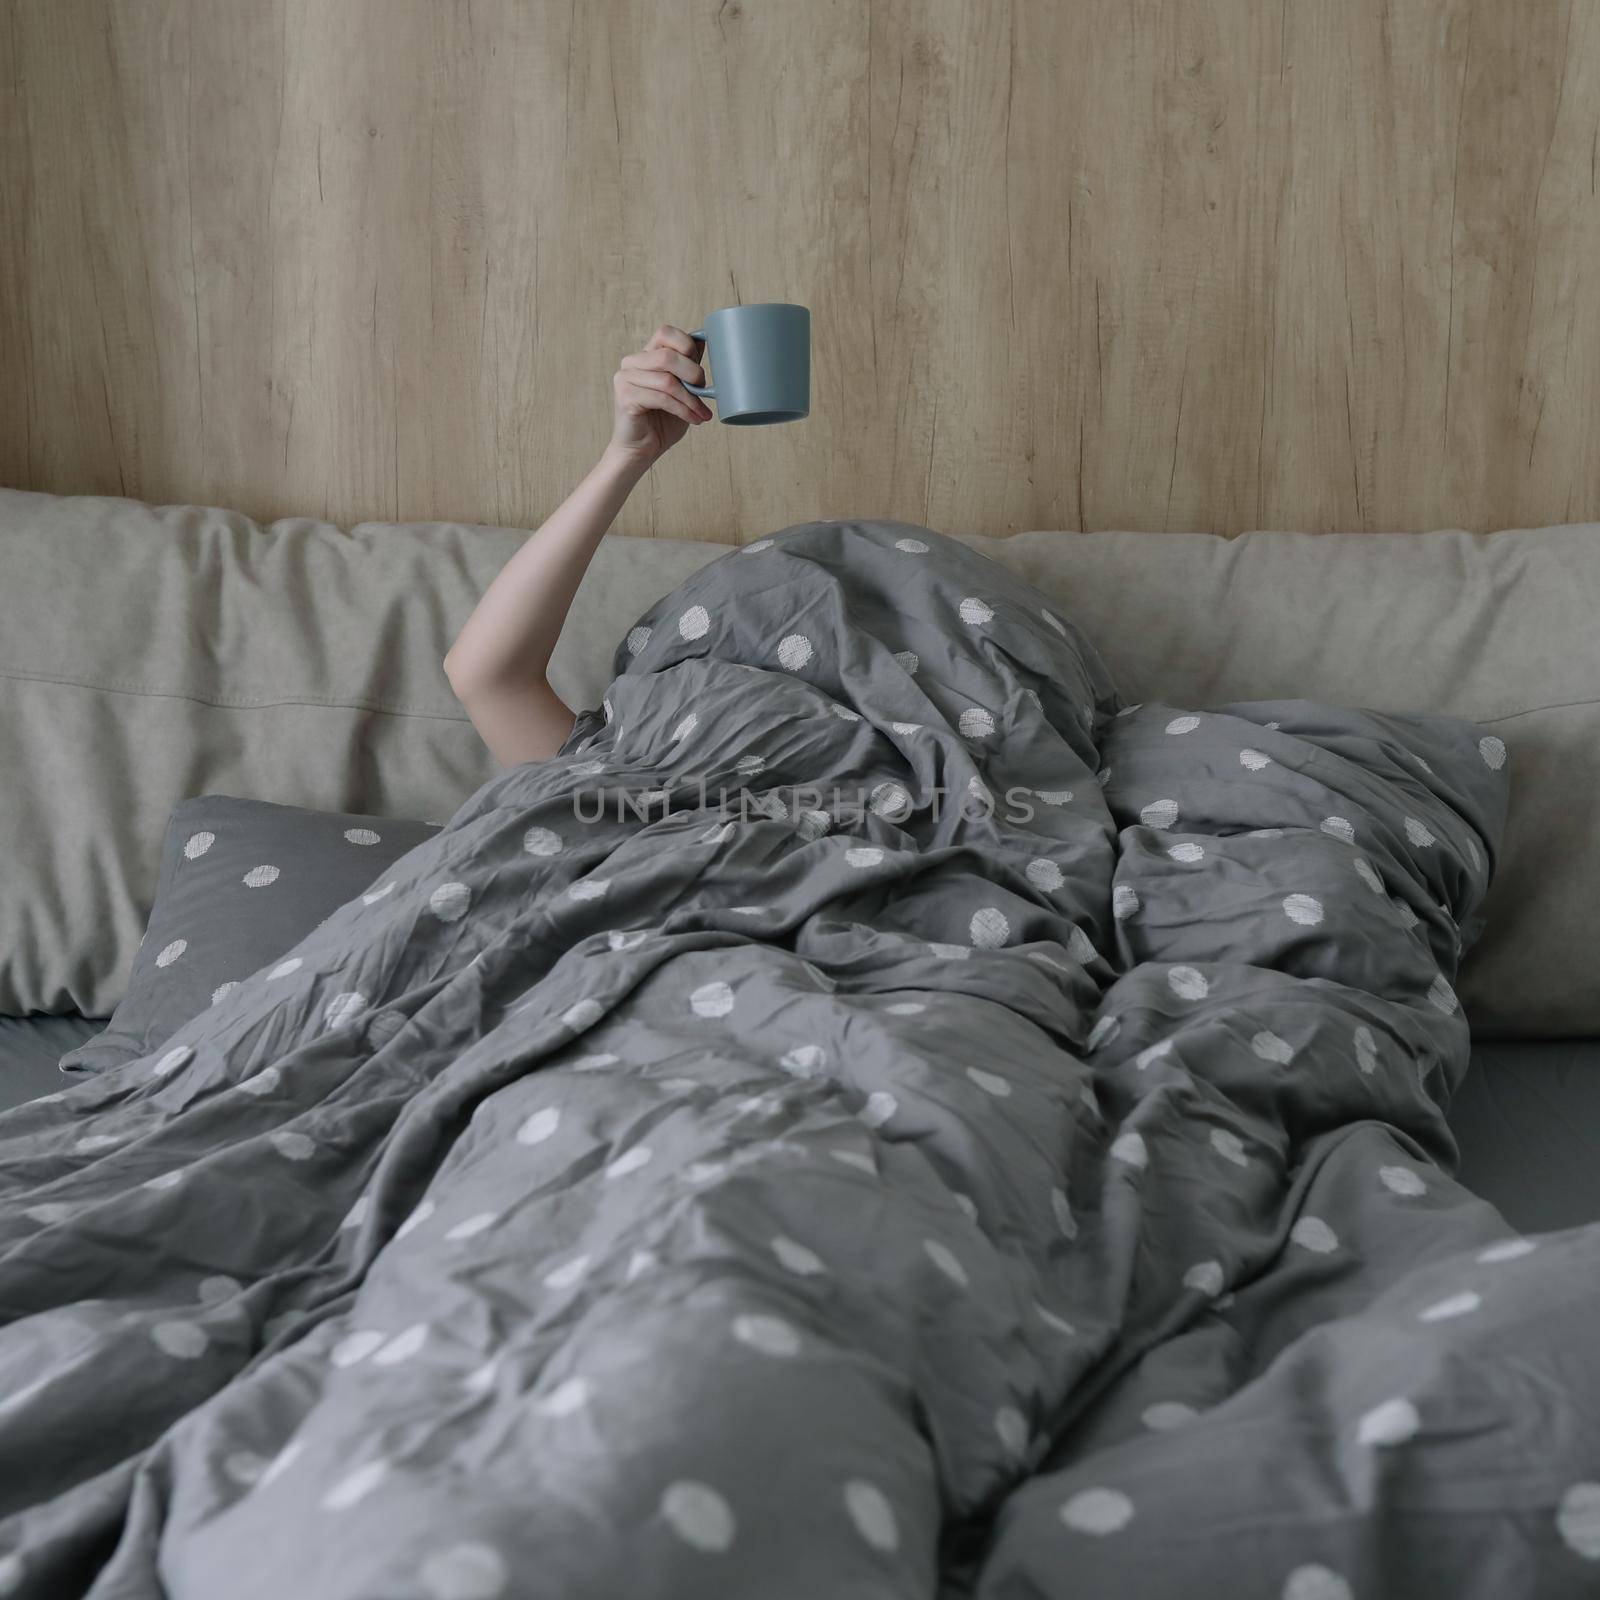 morning, coziness, cozy home concept - a hand with cup of coffee or tea in bed at home.